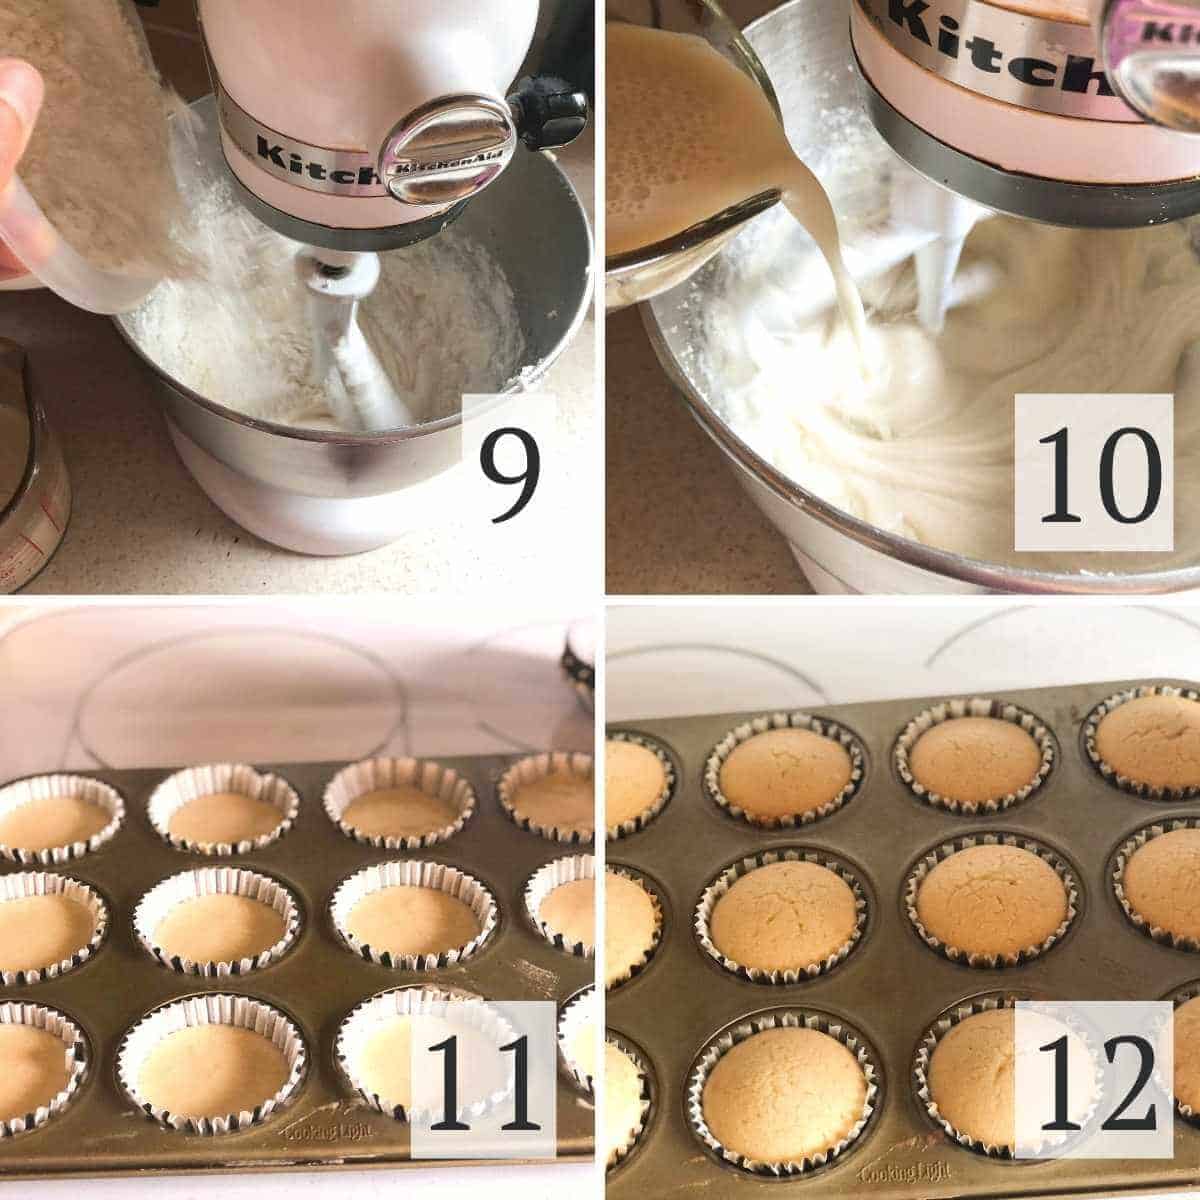 Steps 9 through 10 to make cupcakes including adding flour, milk, pouring into muffin tins, and baking.